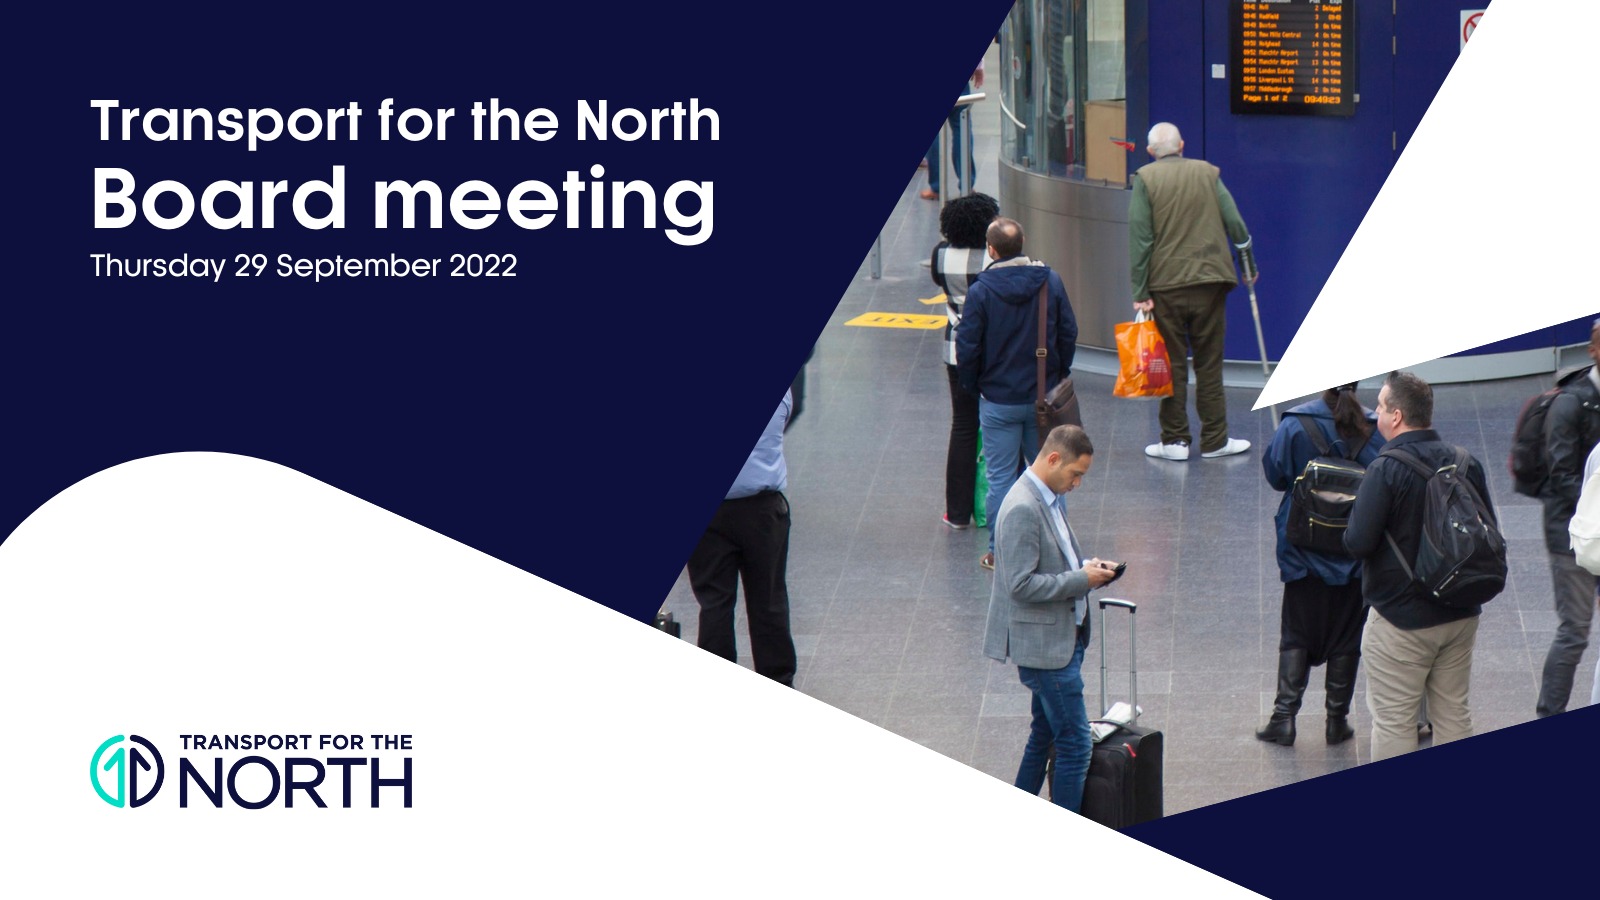 Transport for the North Board Meeting on 29 September 2022